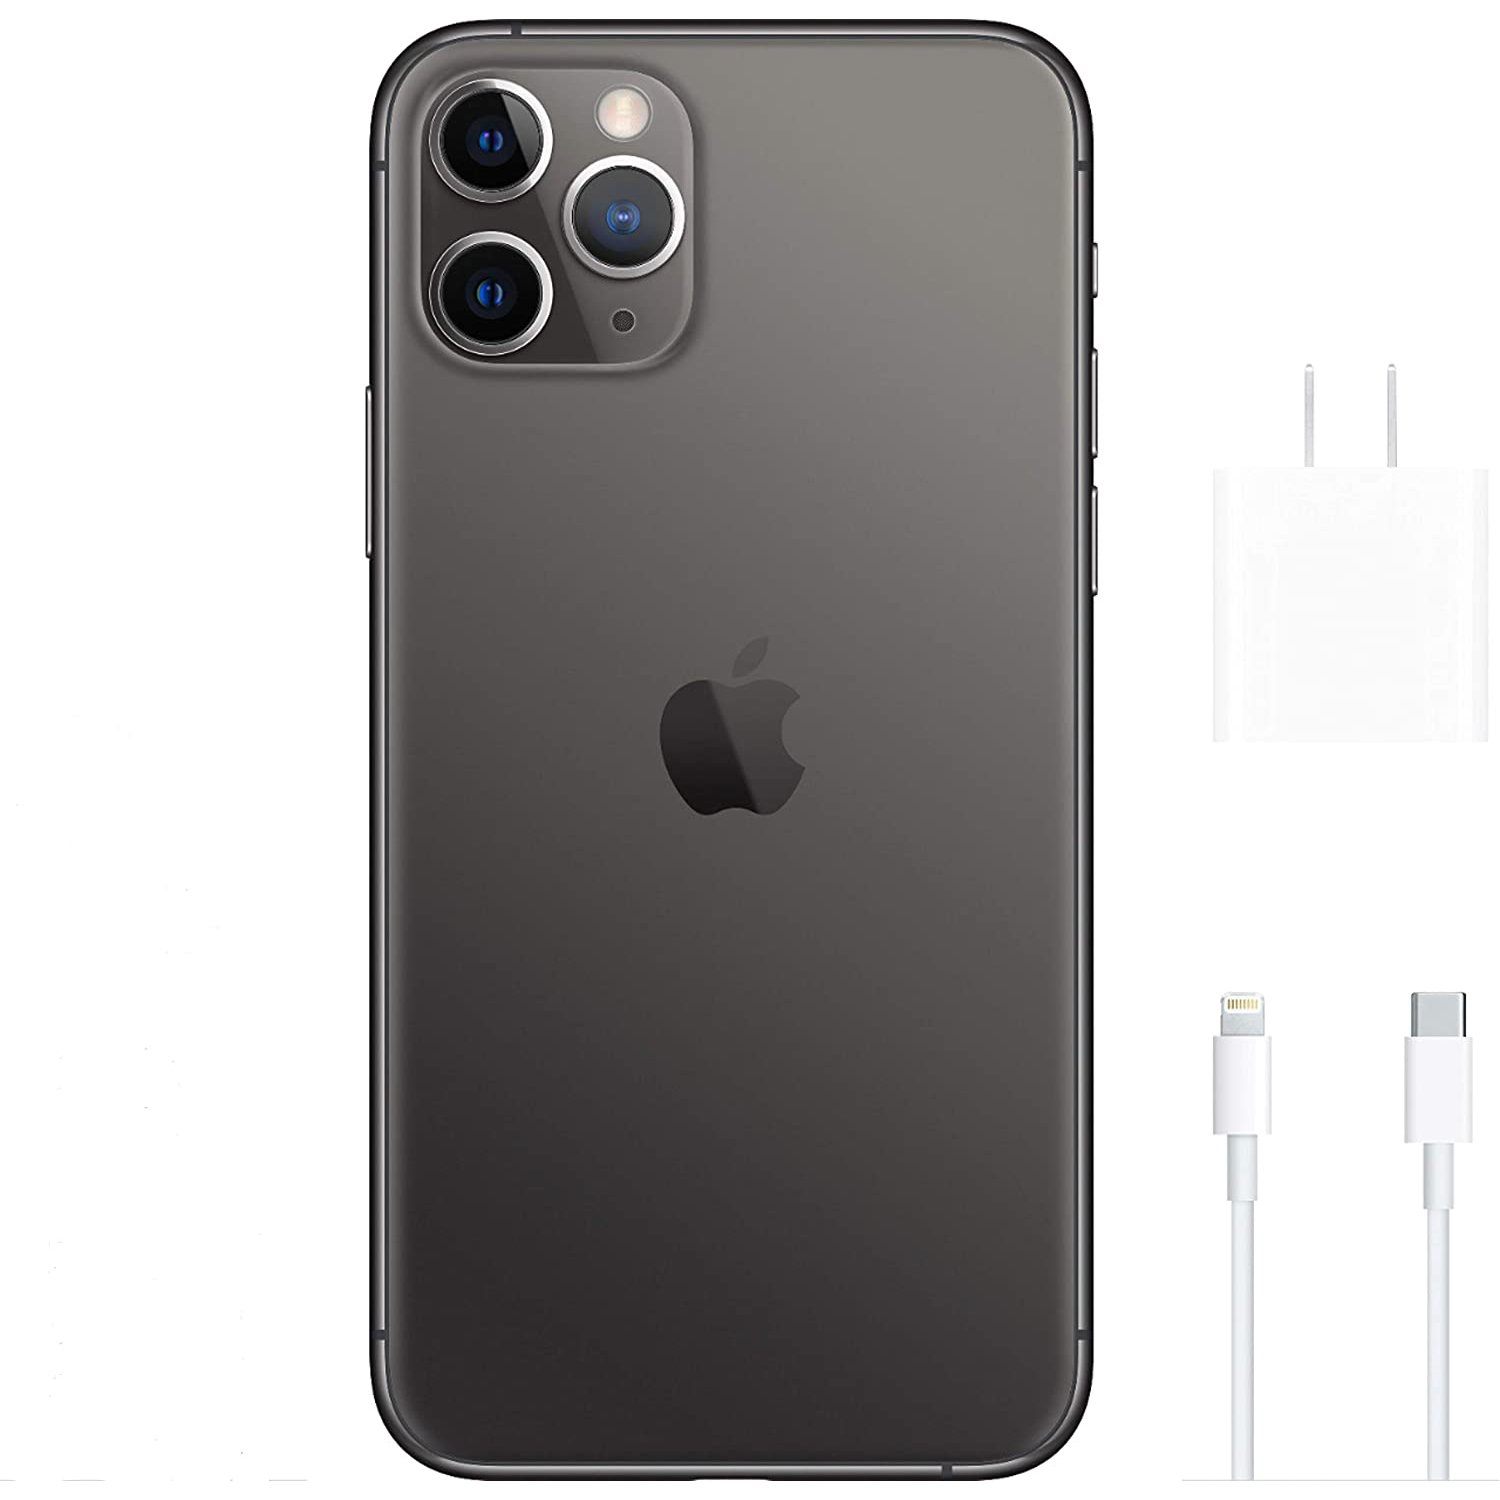 iphone 11 pro max cost